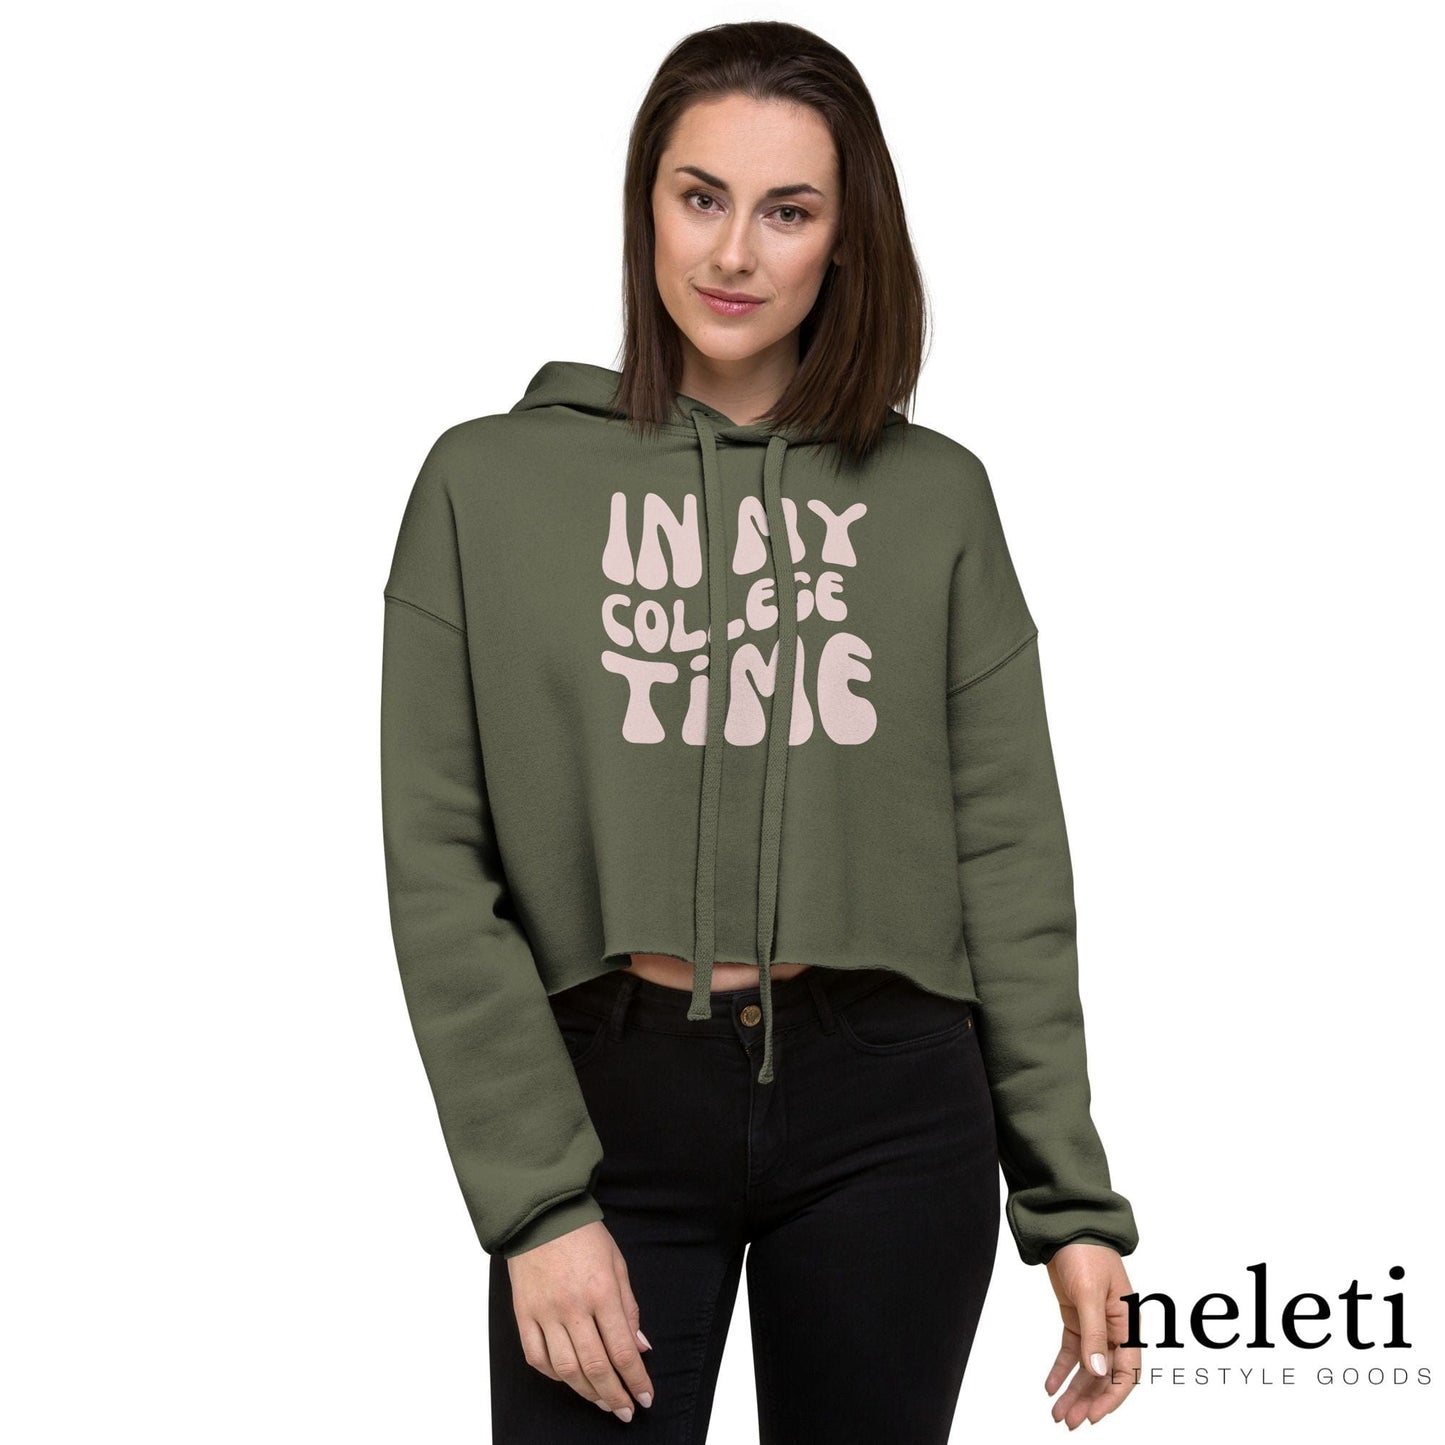 neleti.com-crop-hoodie-in-military-green-color-for-college-student